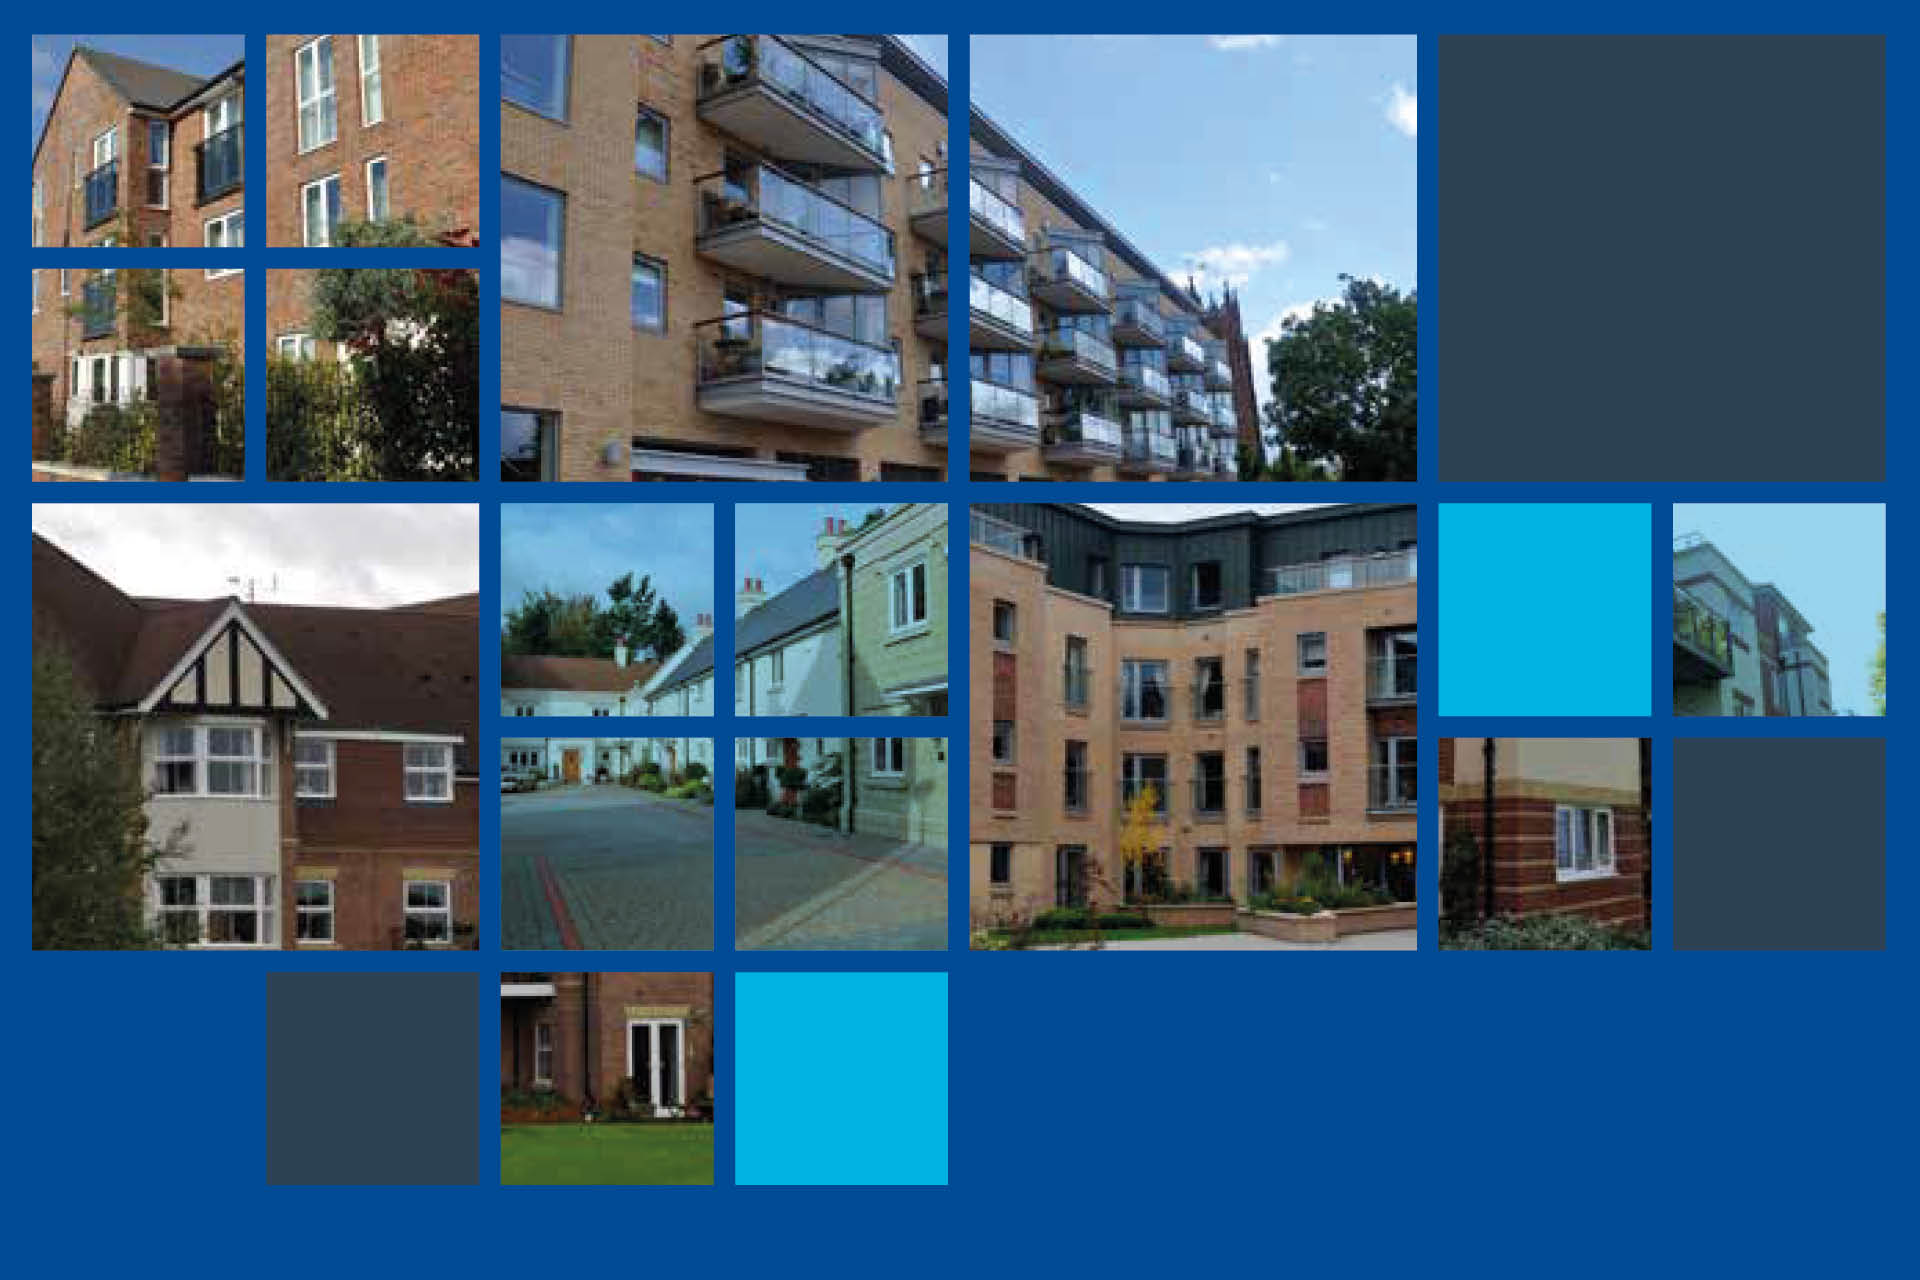 a photo of new build flat blocks with a blue square overlay